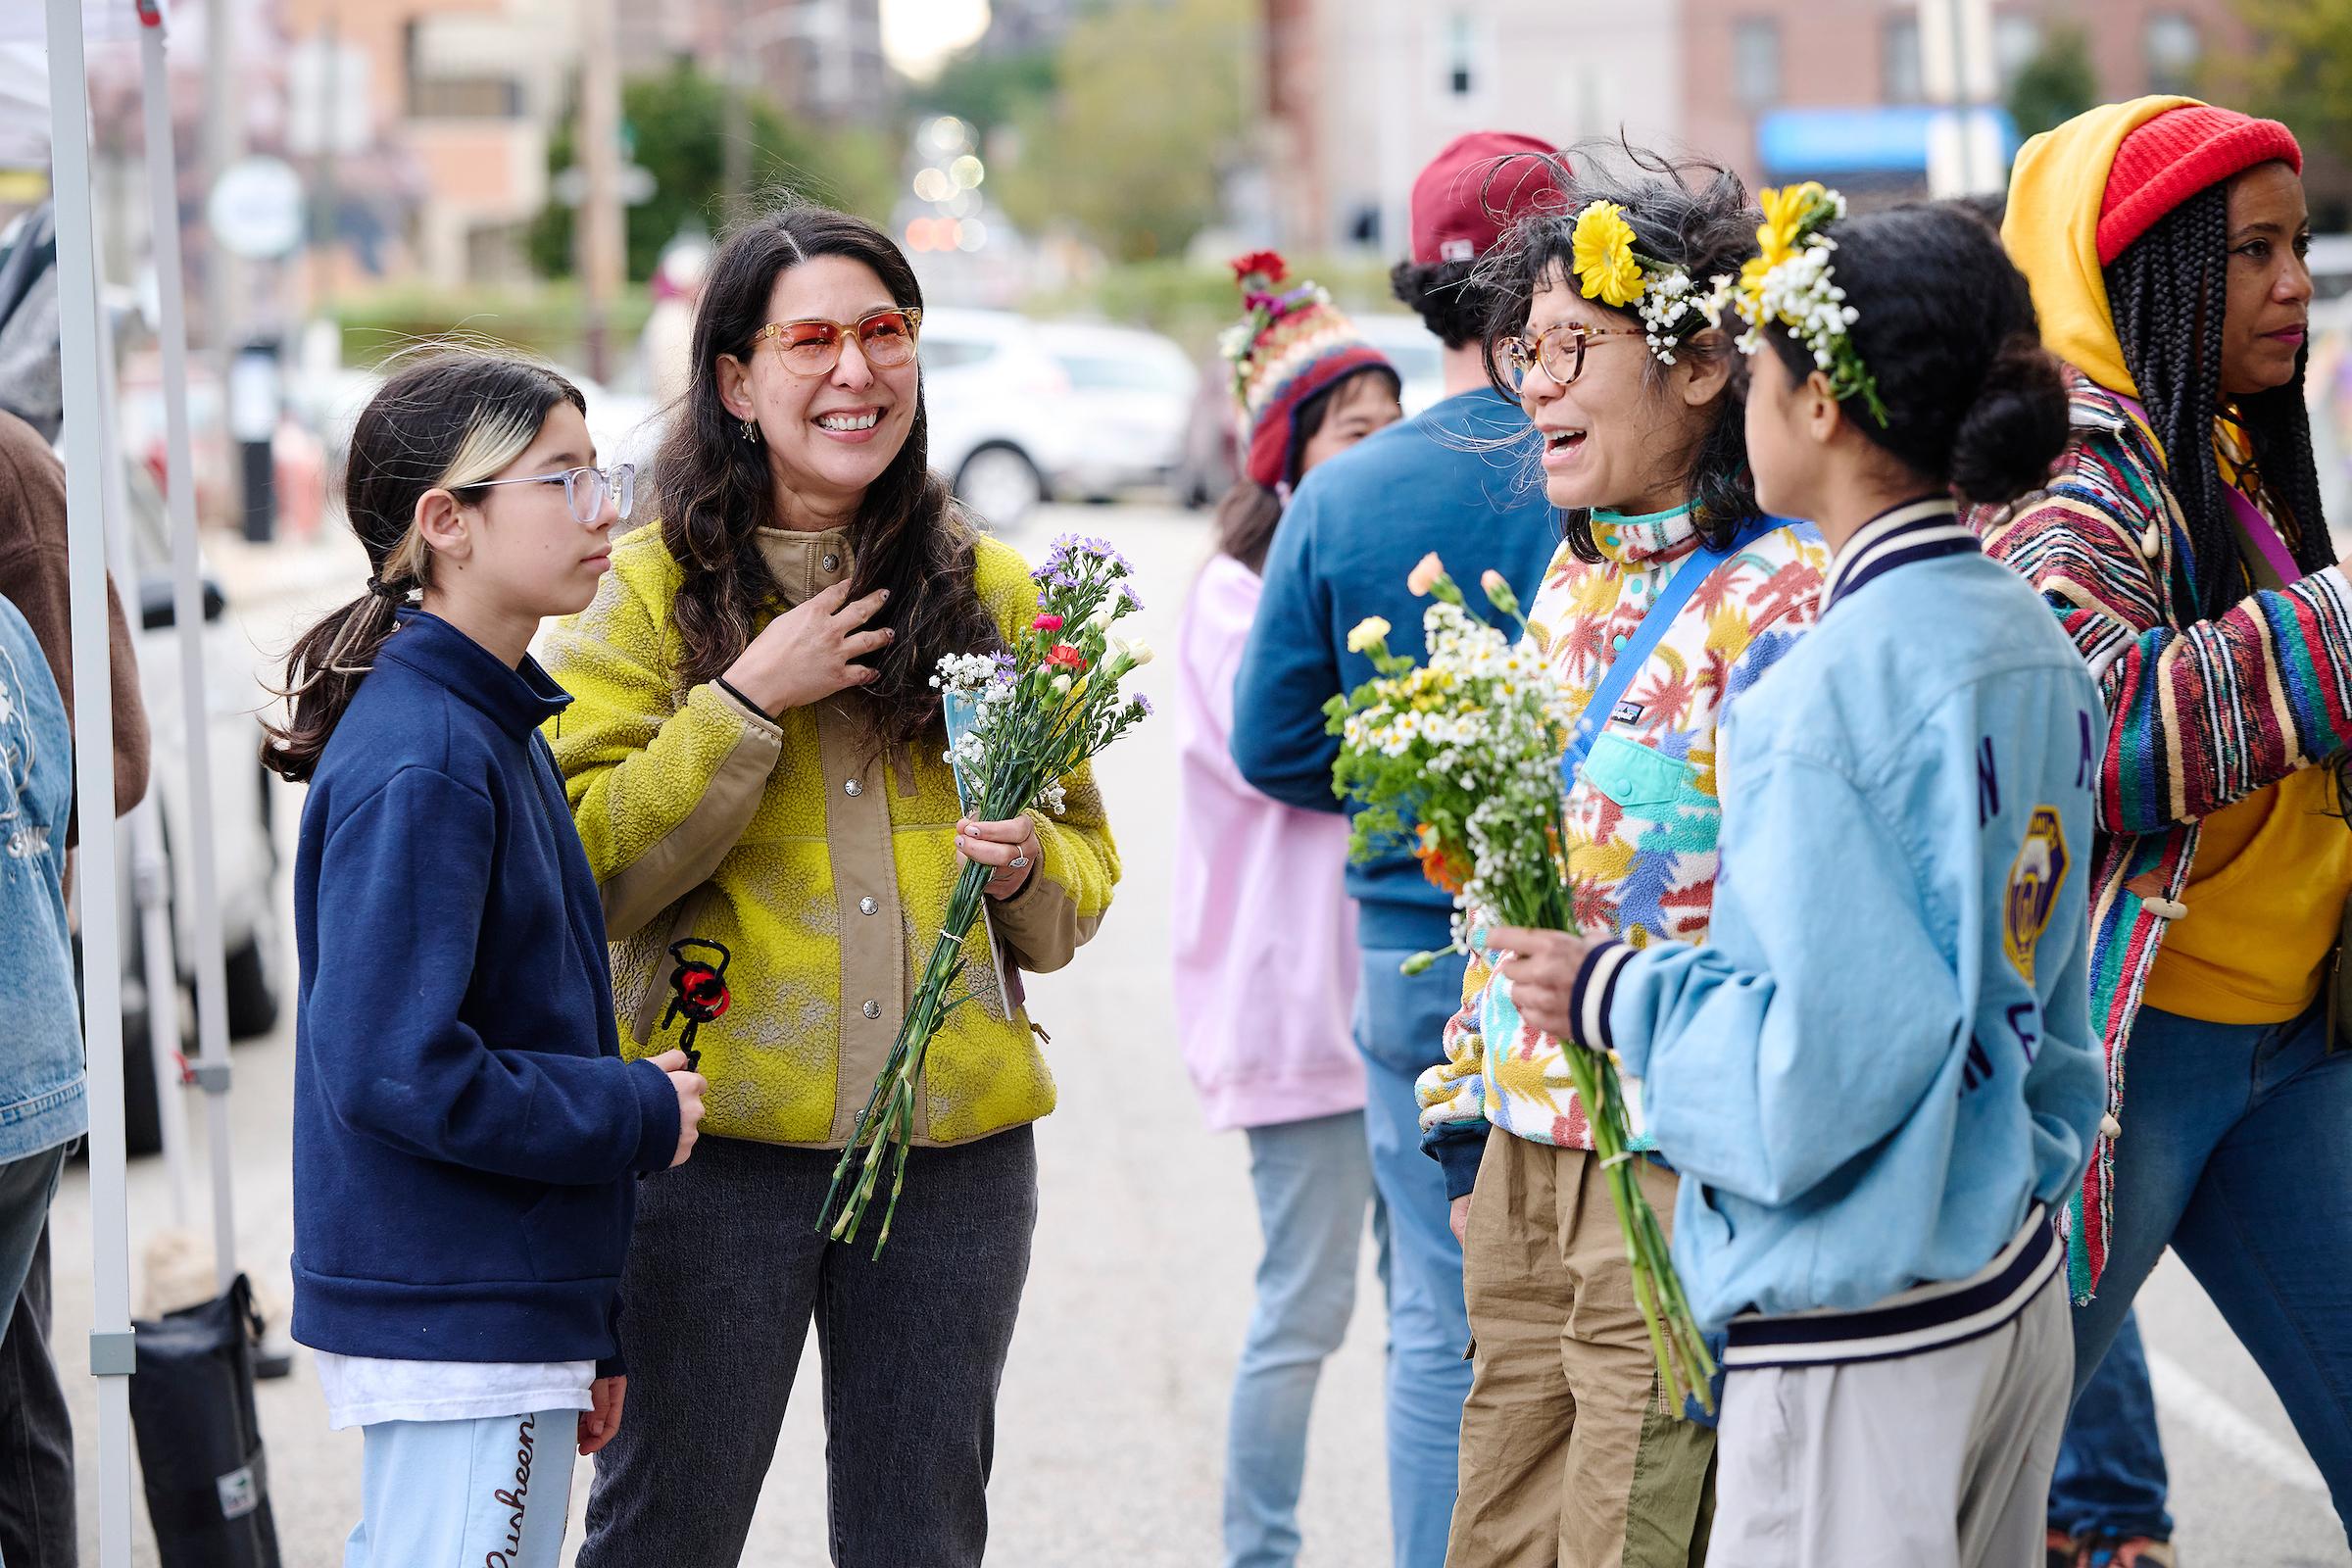 Photo courtesy of Albert Yee. People at Block Party holding flower bouquets and wearing flower crowns.